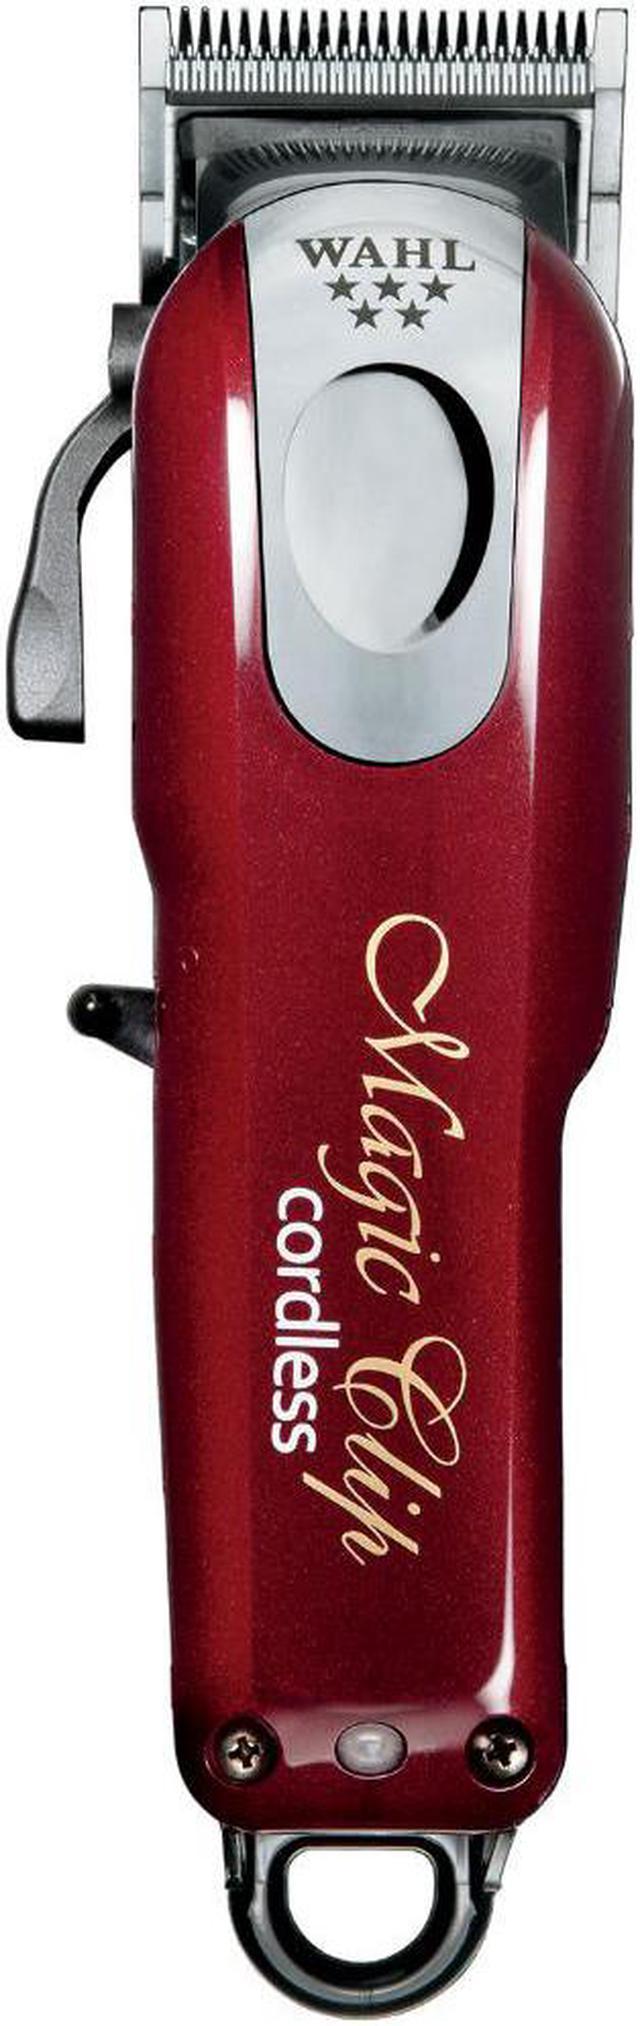 Details about Wahl 5 Star Magic Clip 8148 Professional Cord / Cordless Fade Hair  Clipper Cut Shavers & Trimmers For Men 